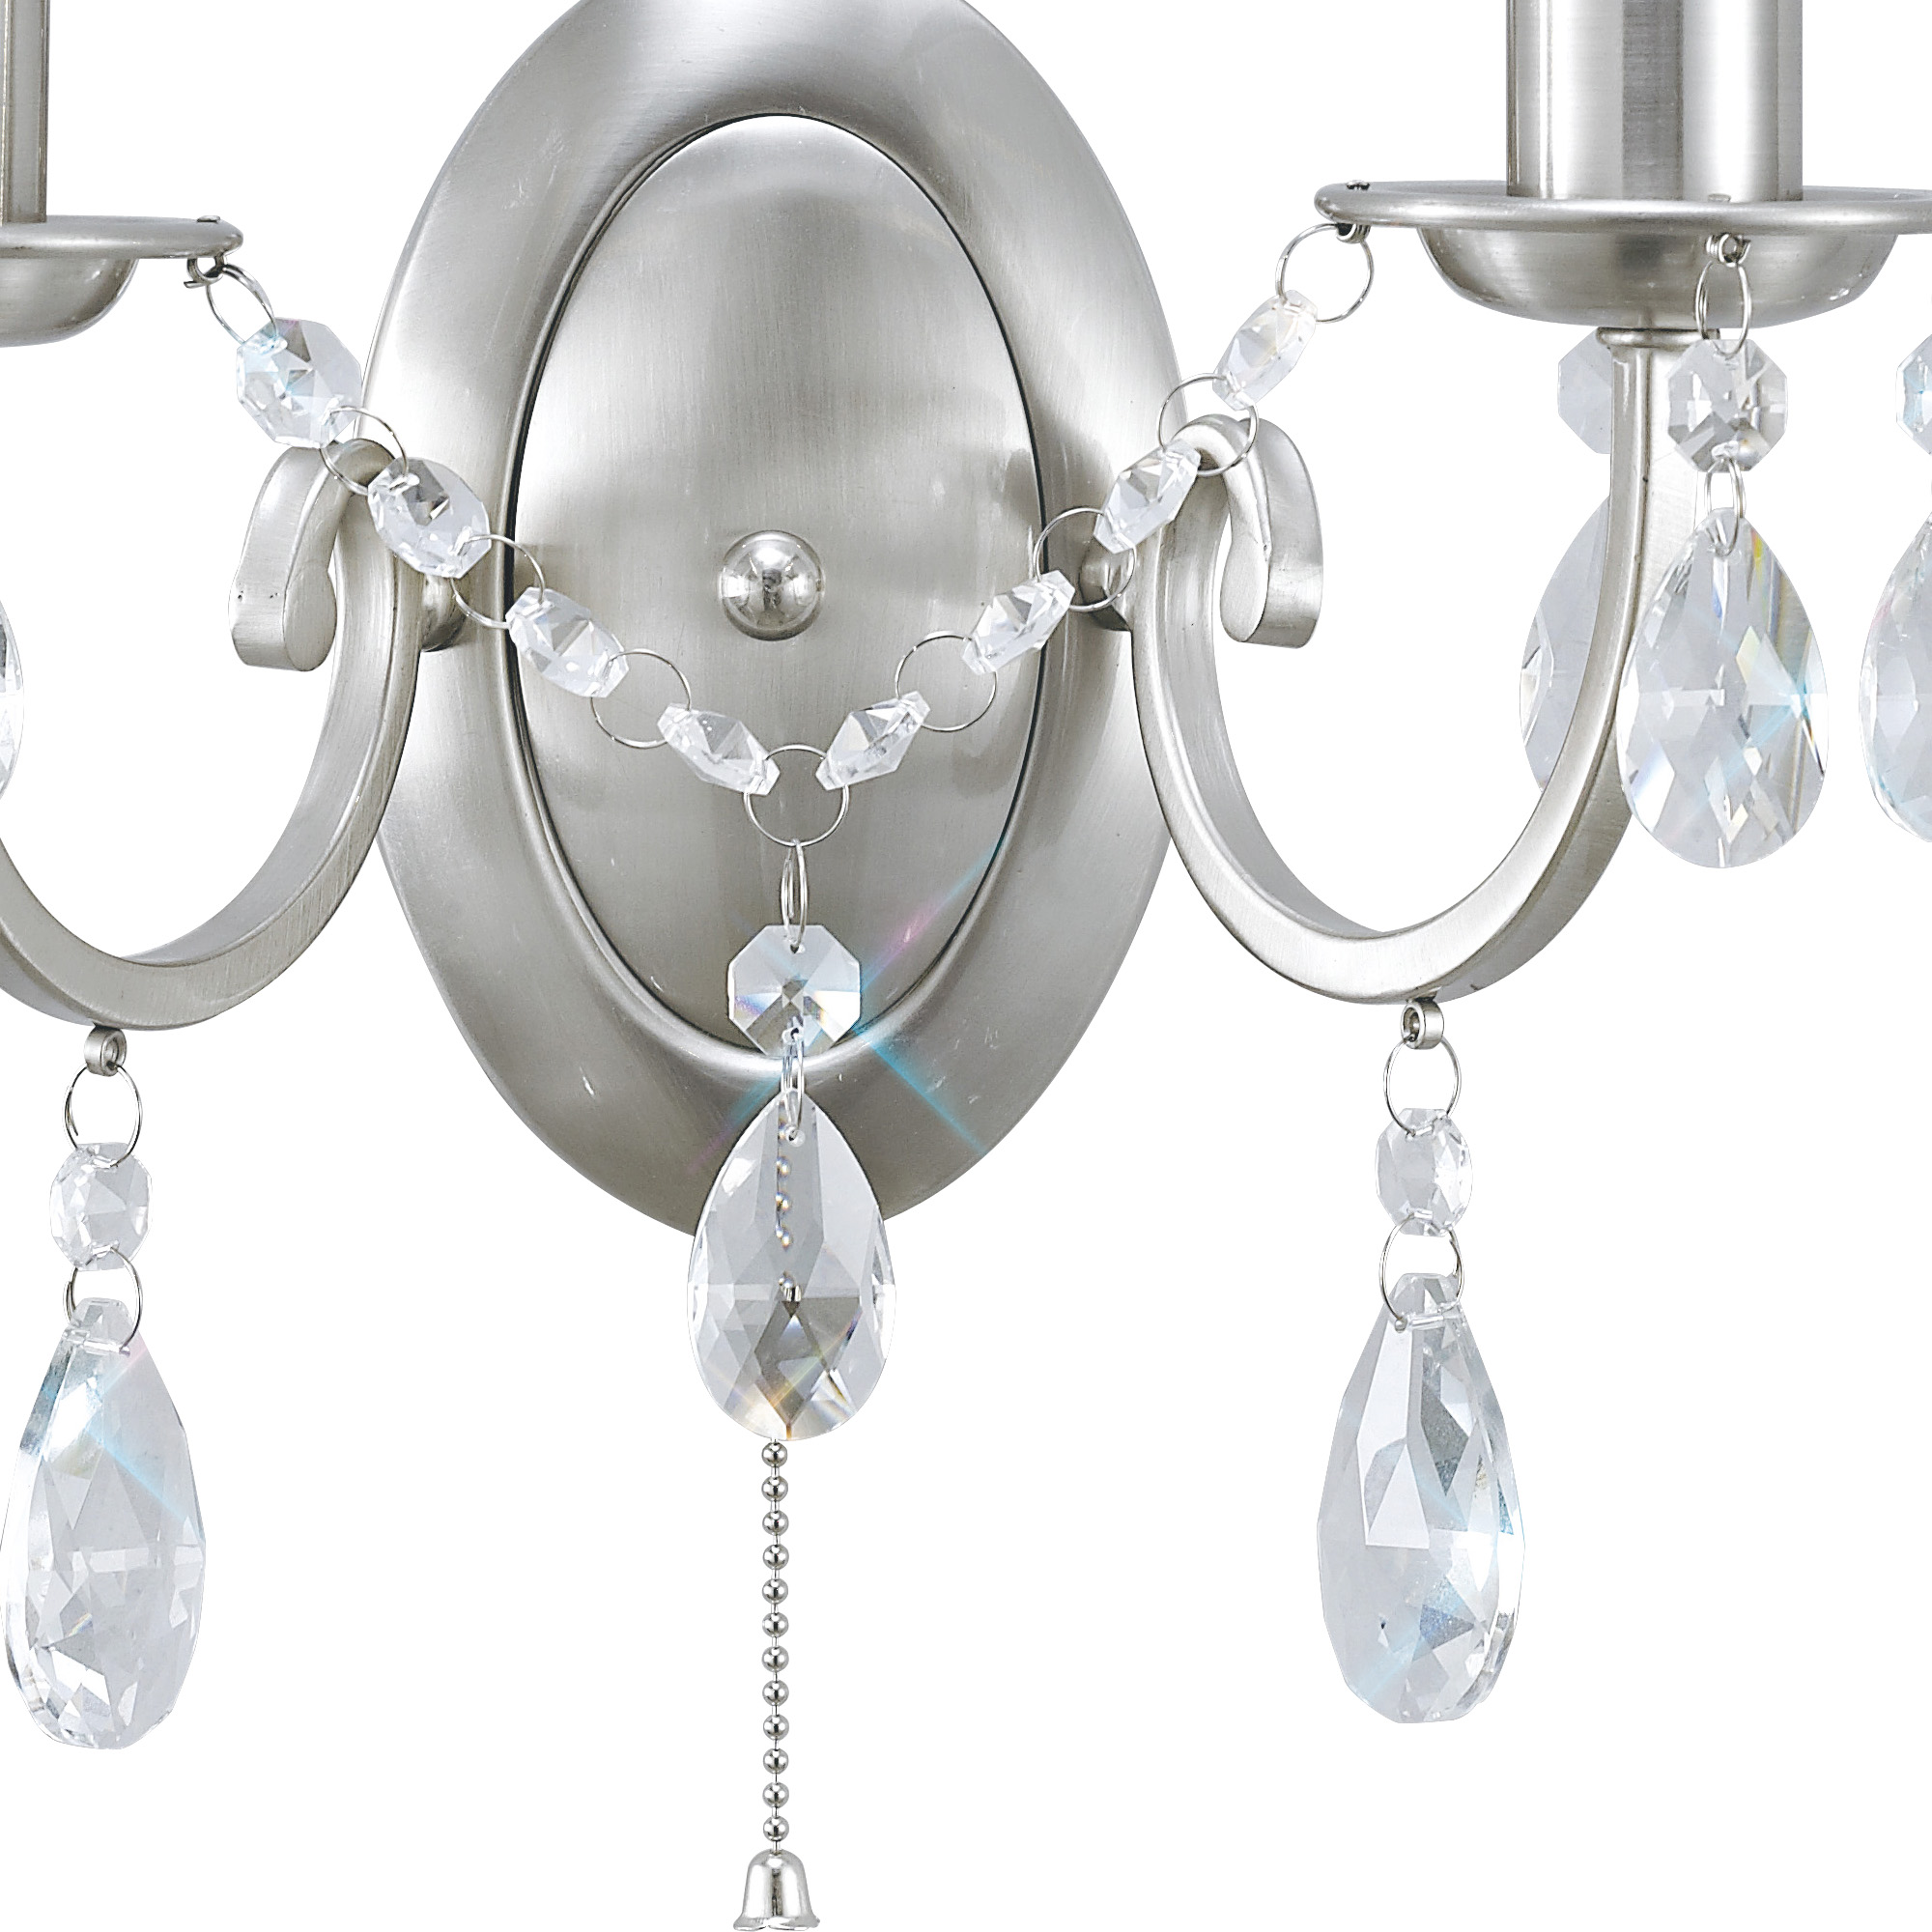 IL30972  Kyra Crystal Switched Wall Lamp 2 Light